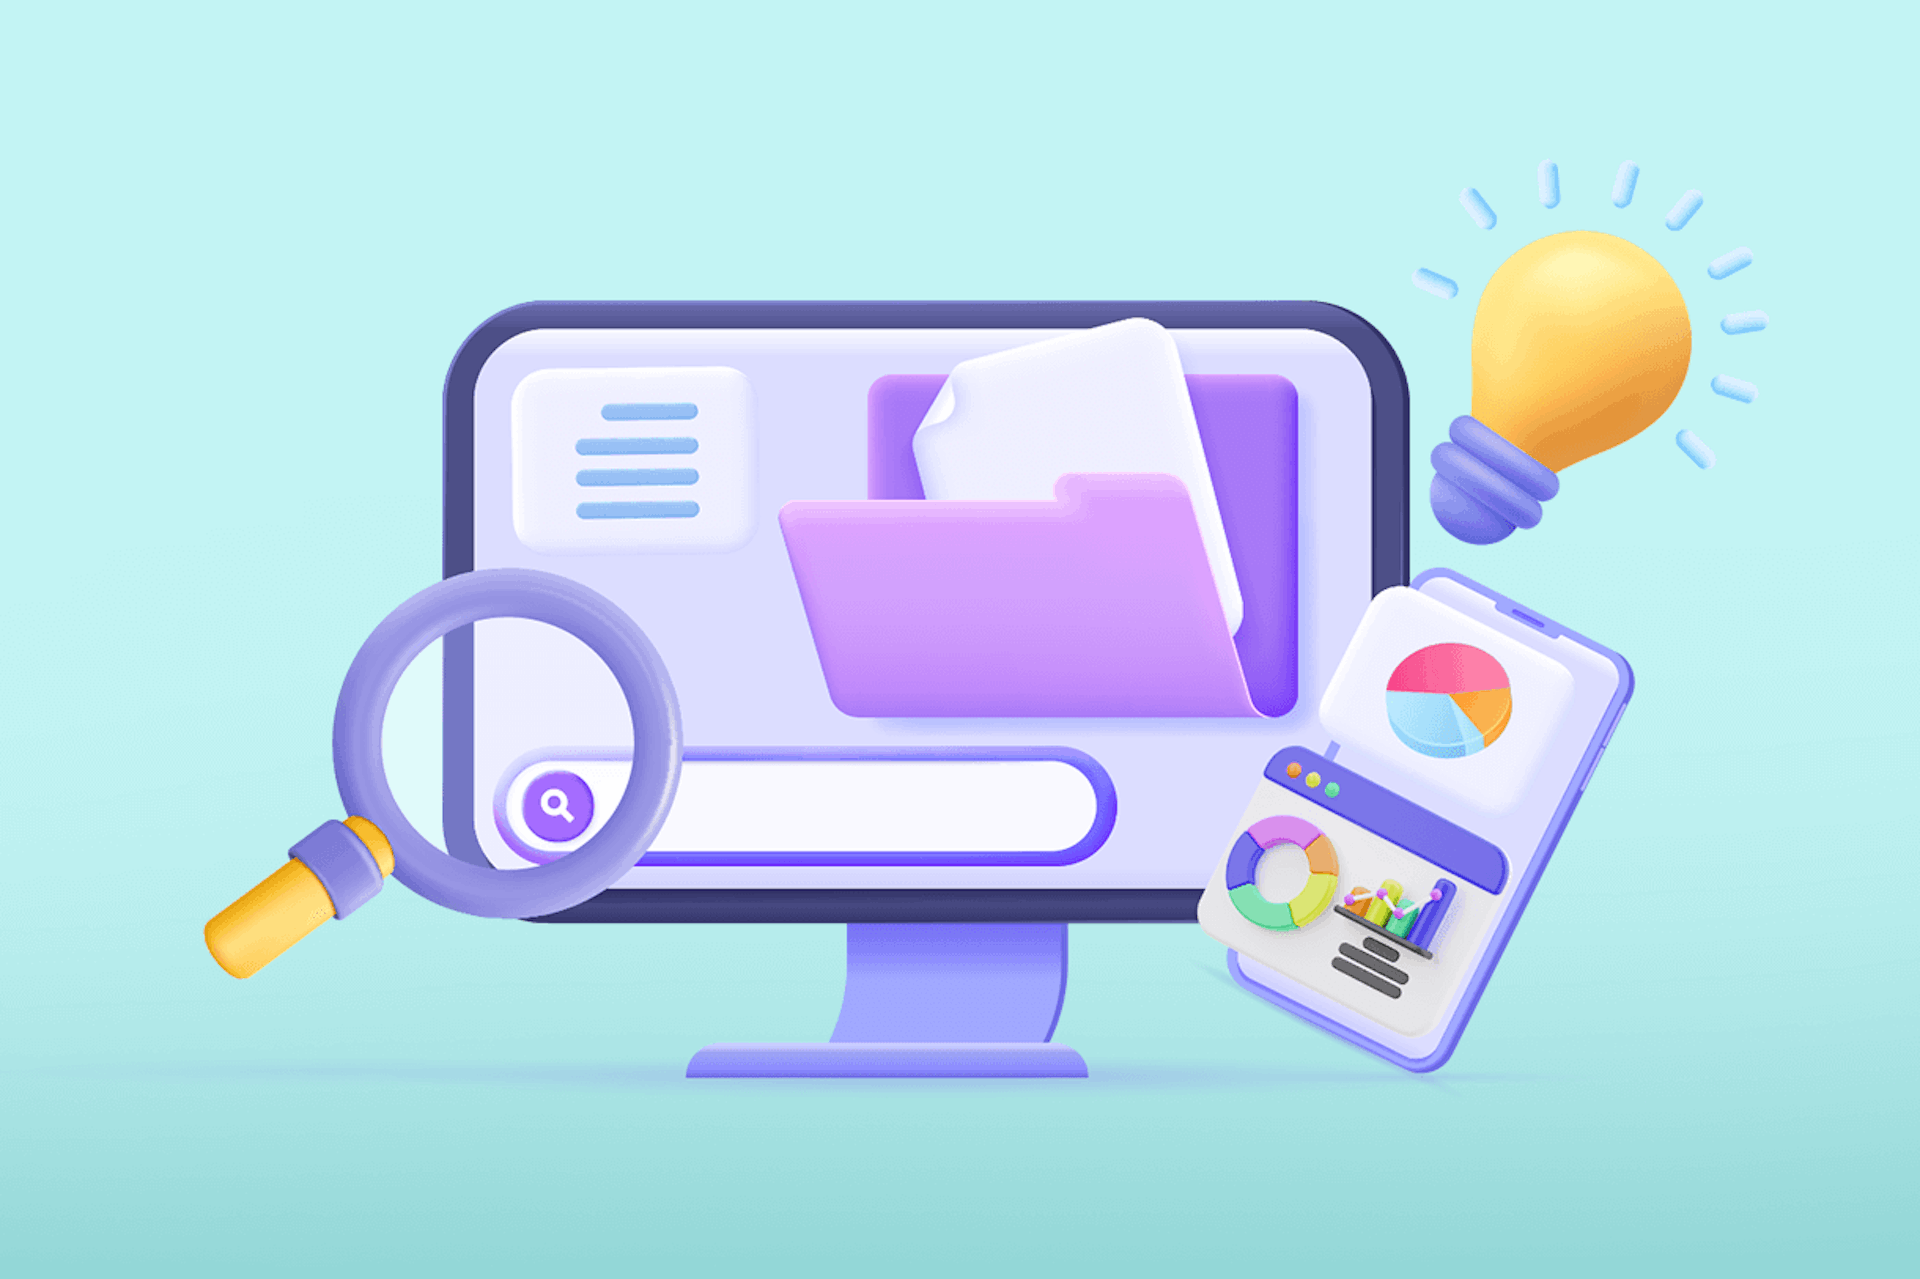 An illustration showing a desktop computer with a large magnifying glass over the search bar, a big purple folder with a document inside, a light bulb, and graphs. How to do market research blog post.